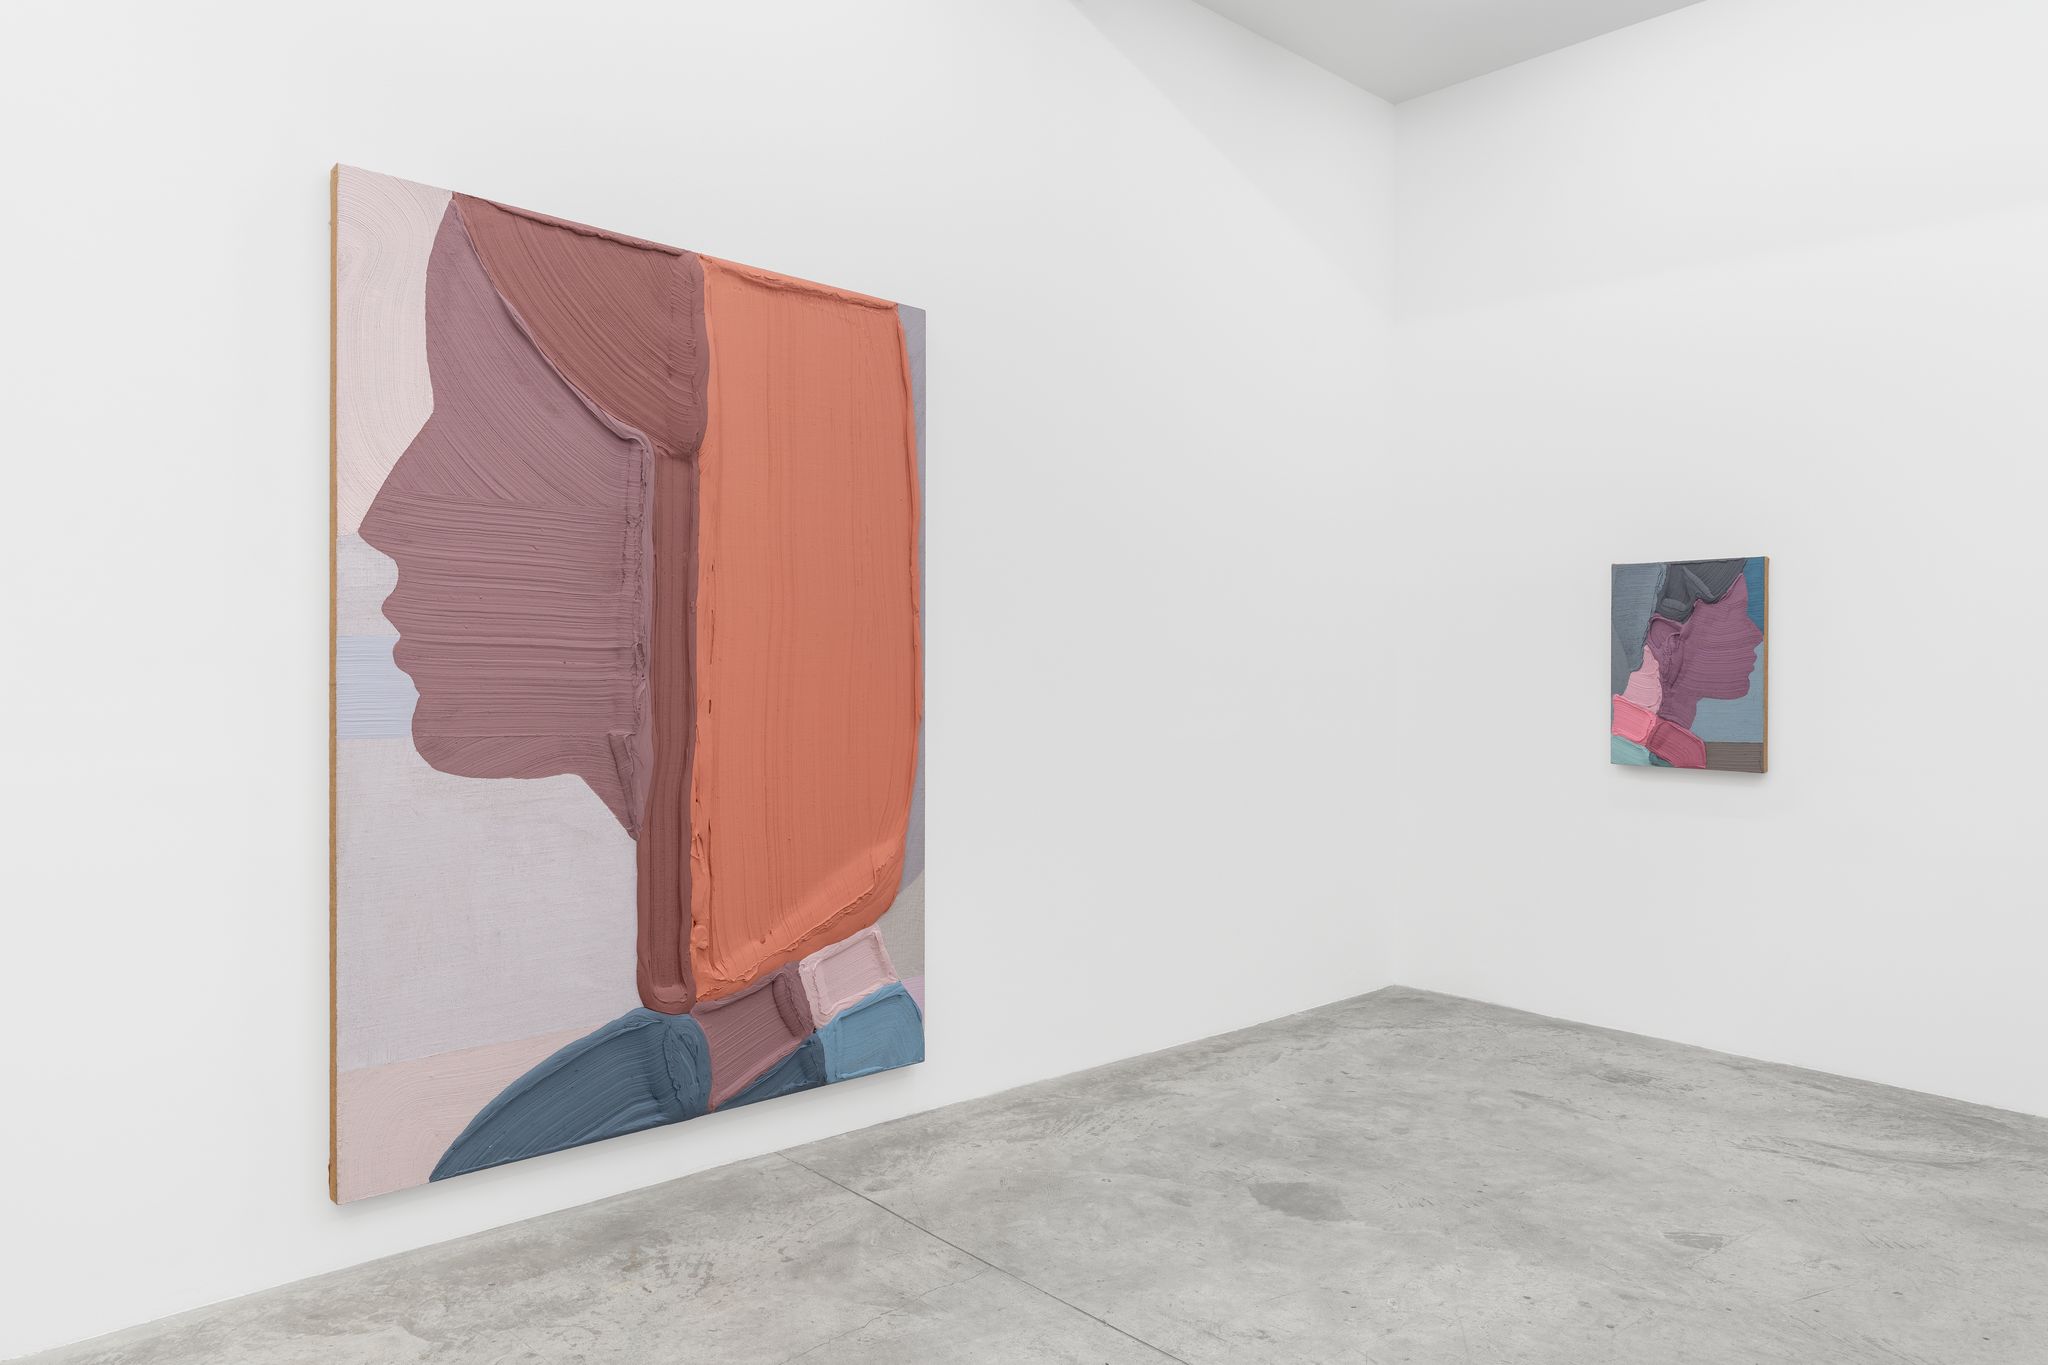 Installation view of two paintings in a white-wall gallery space. The paintings show minimal portraits of female figures in profile.